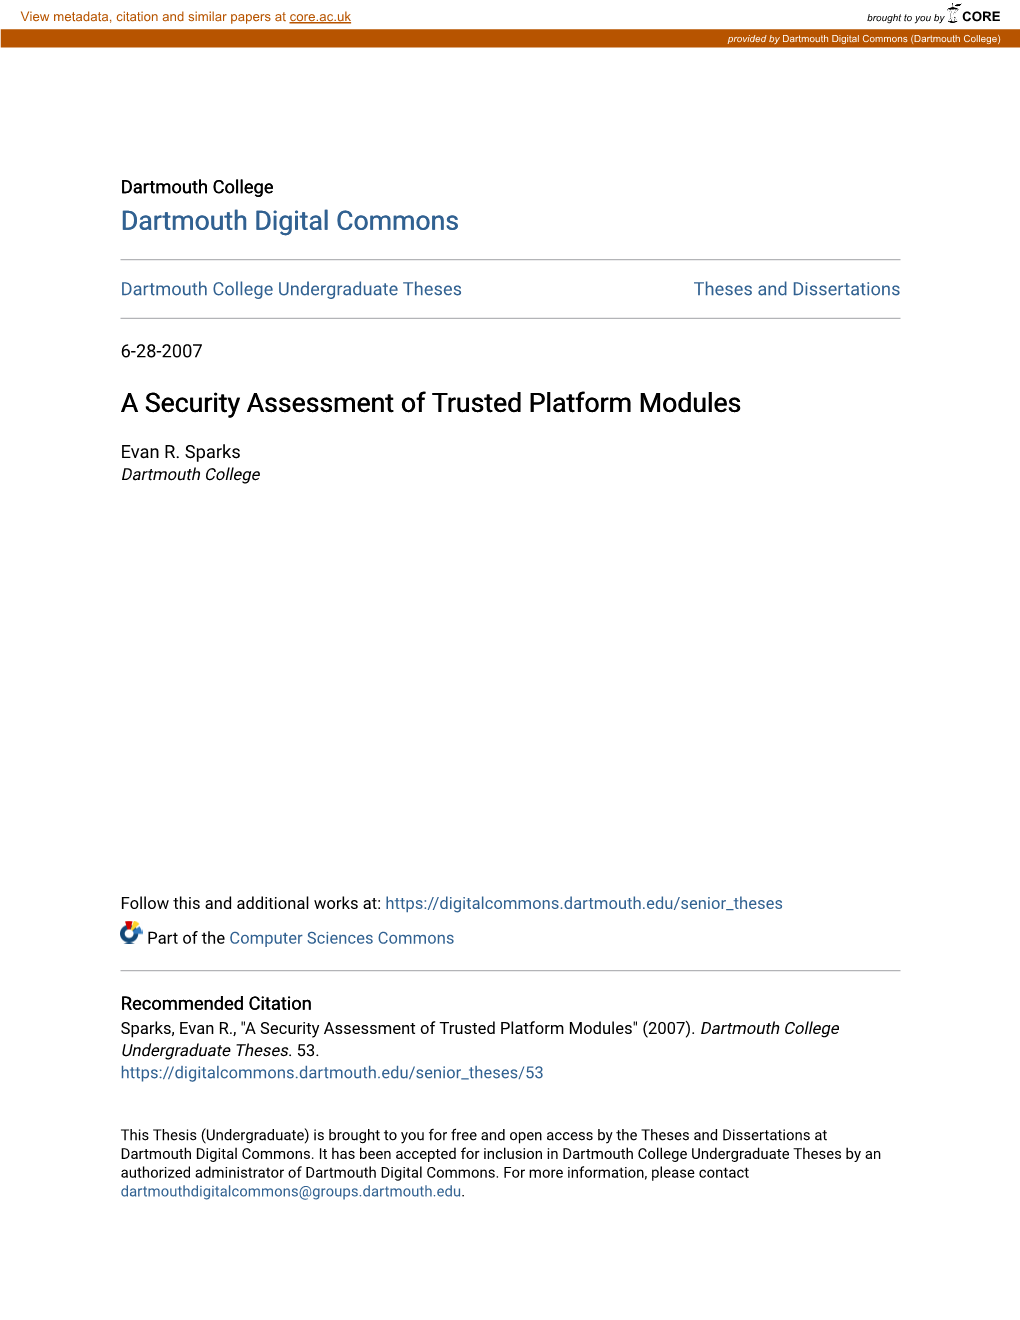 A Security Assessment of Trusted Platform Modules